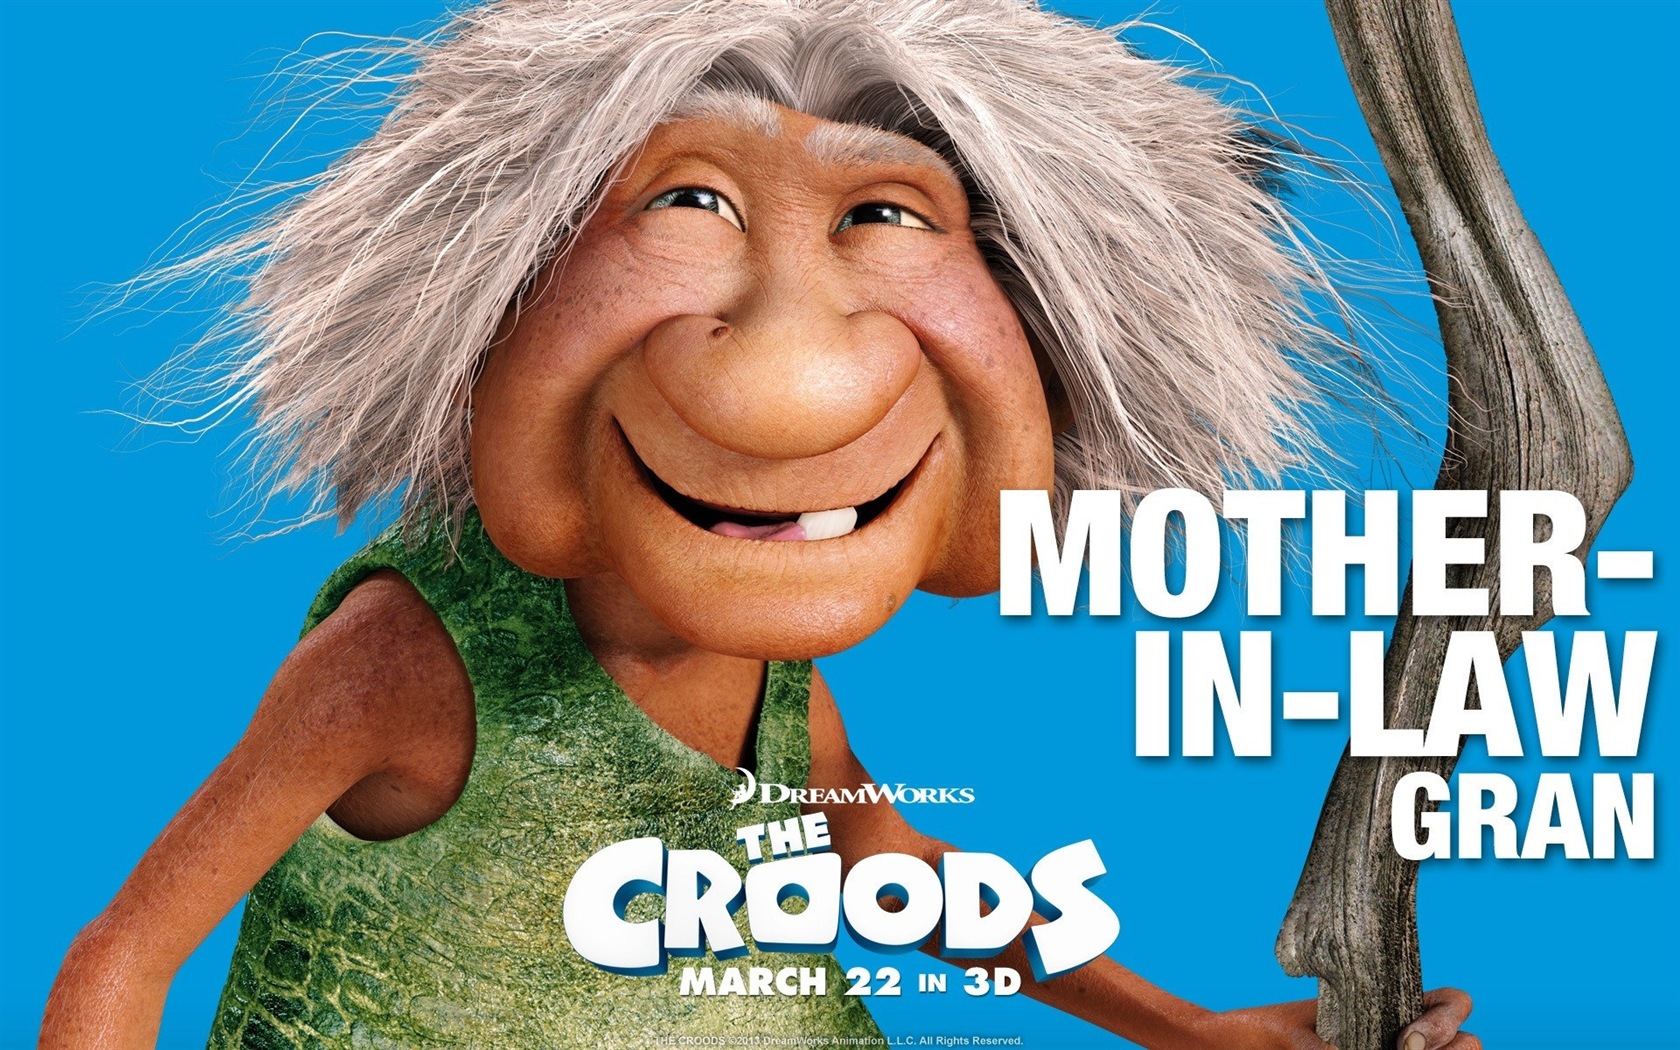 The Croods HD movie wallpapers #6 - 1680x1050